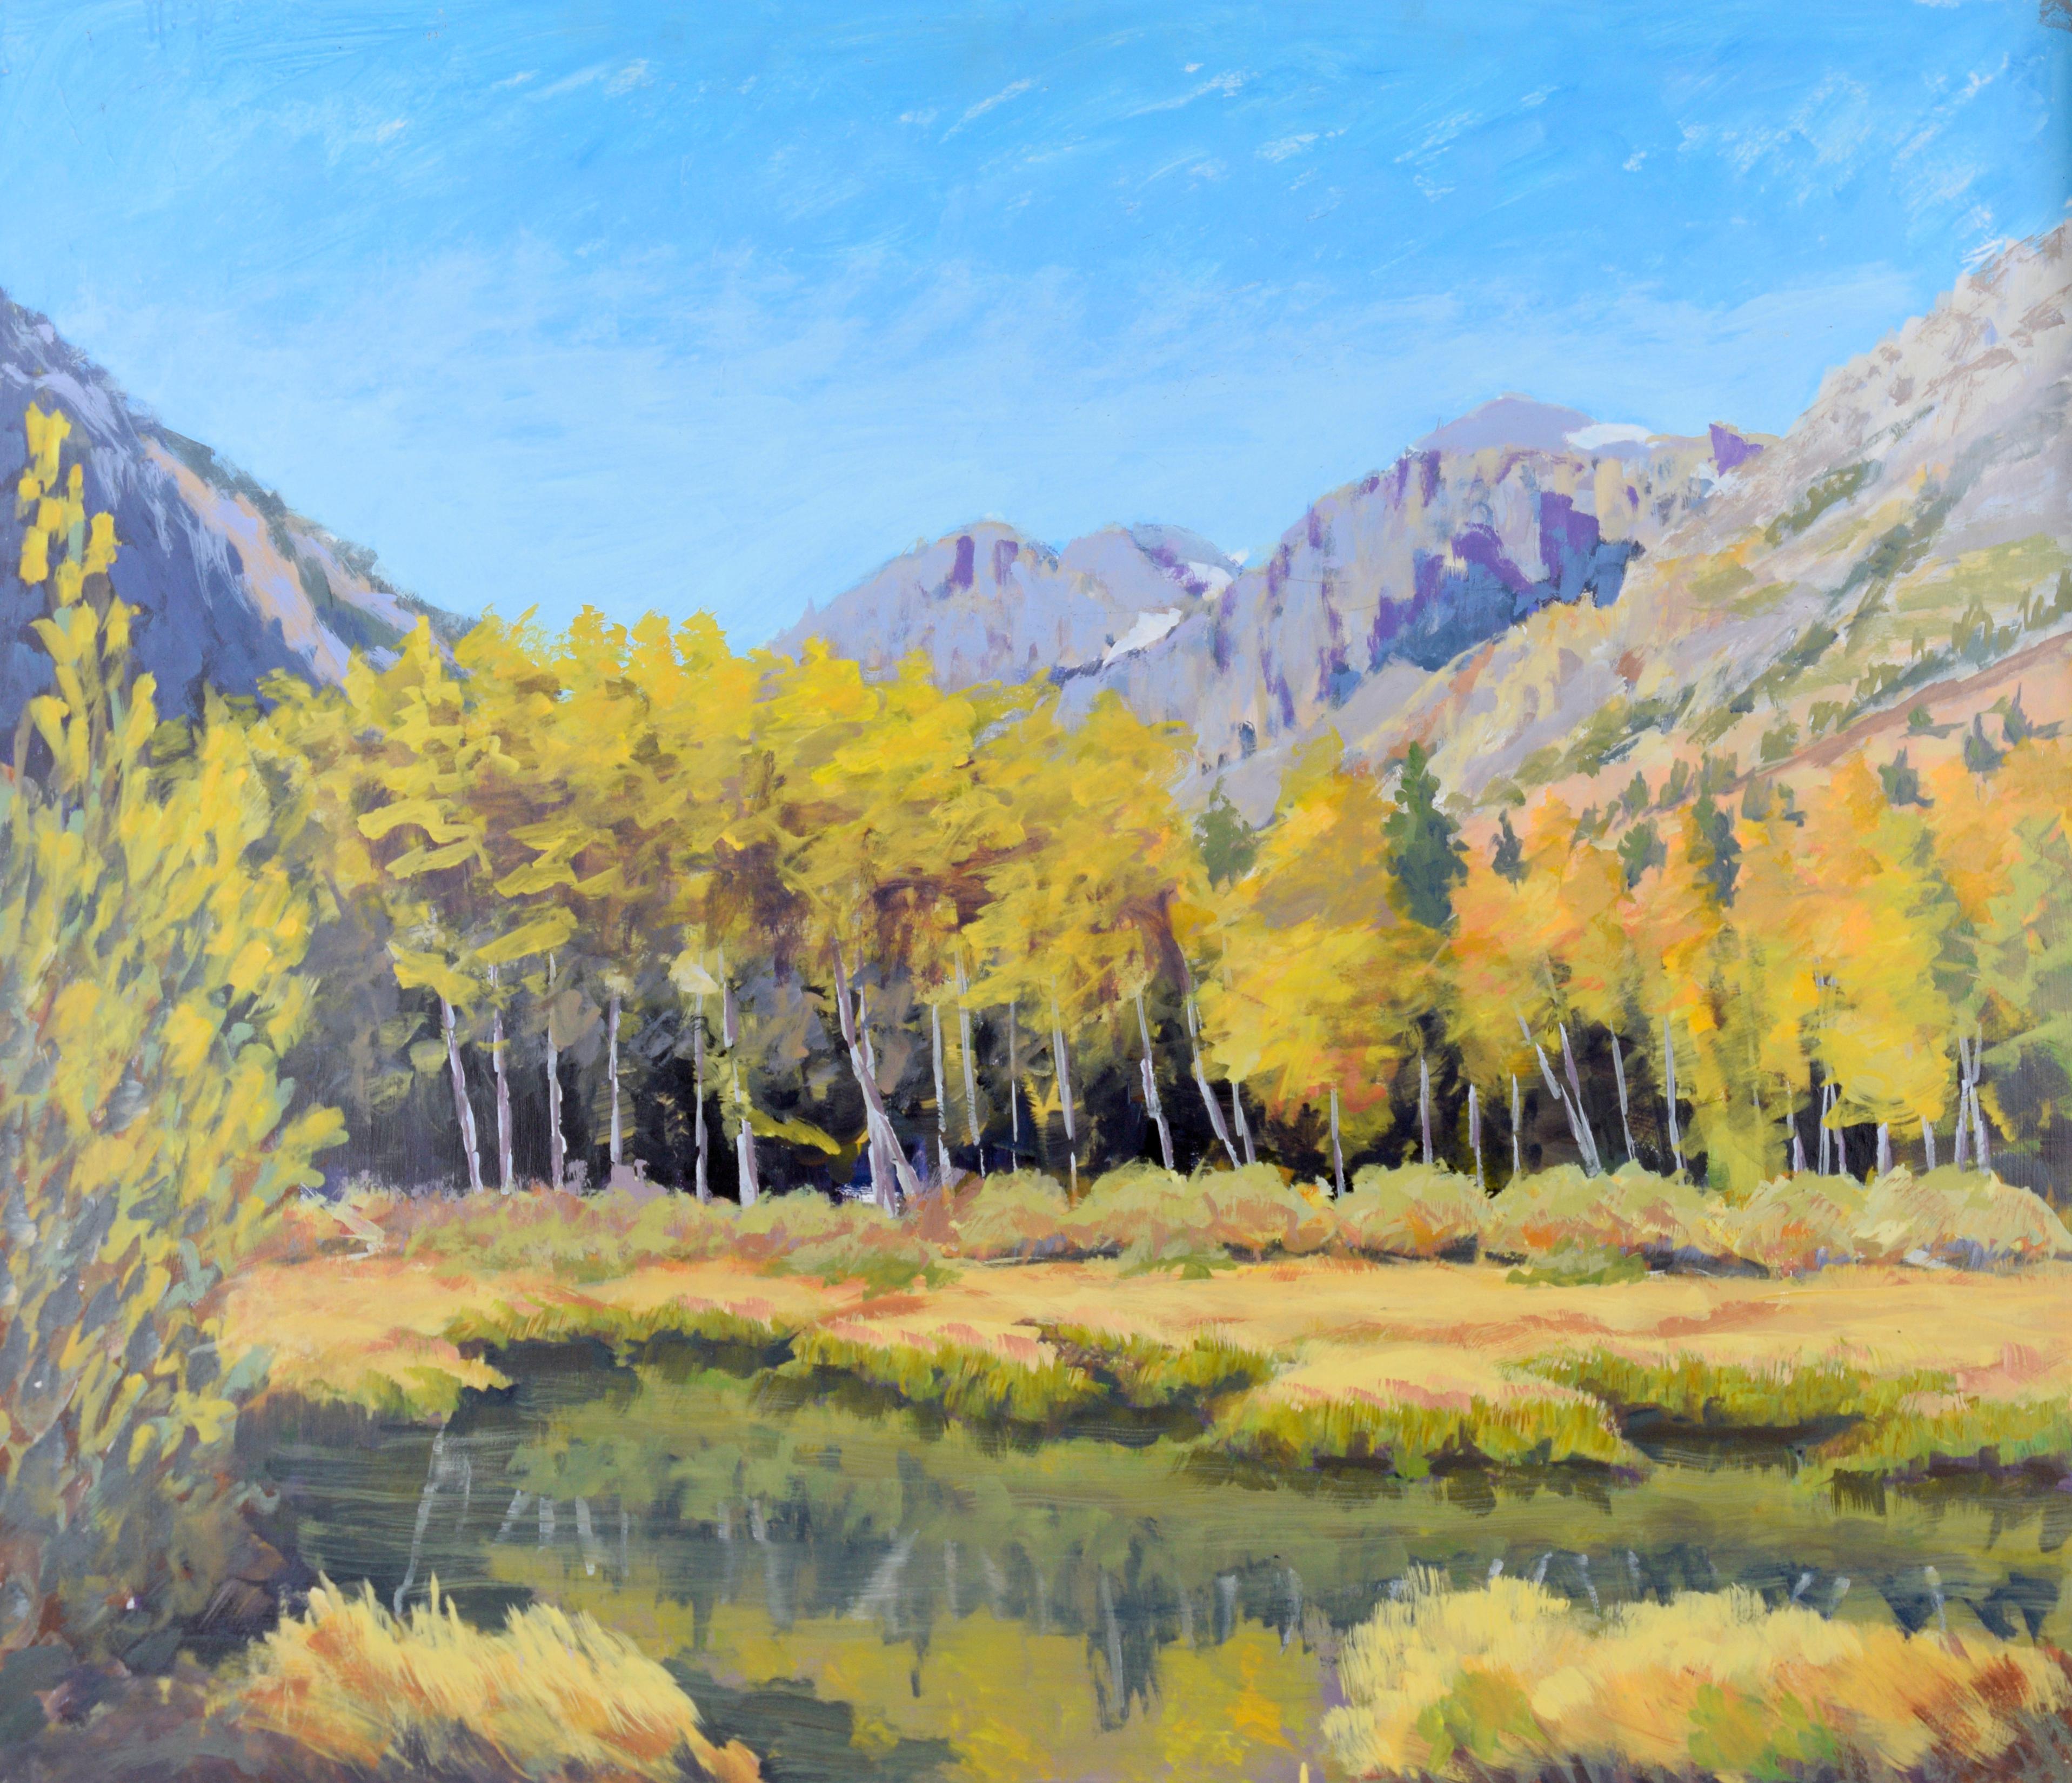 Nick White Landscape Painting - A Pond Under an Aspen Grove - Western Plein Aire Landscape Acrylic on Board